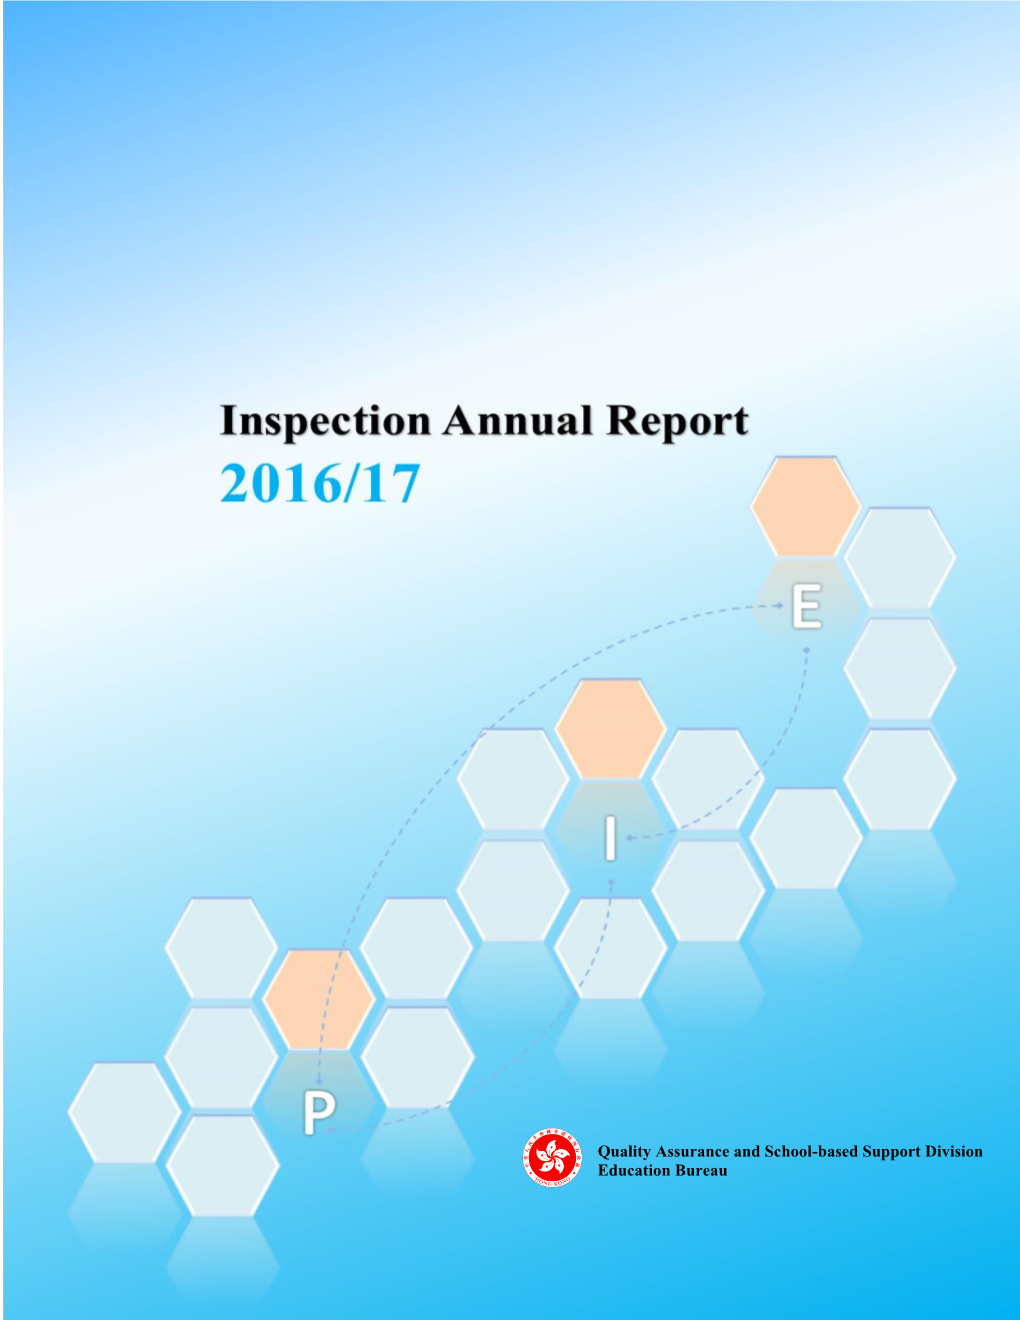 Annual Report 2014/15 Contents